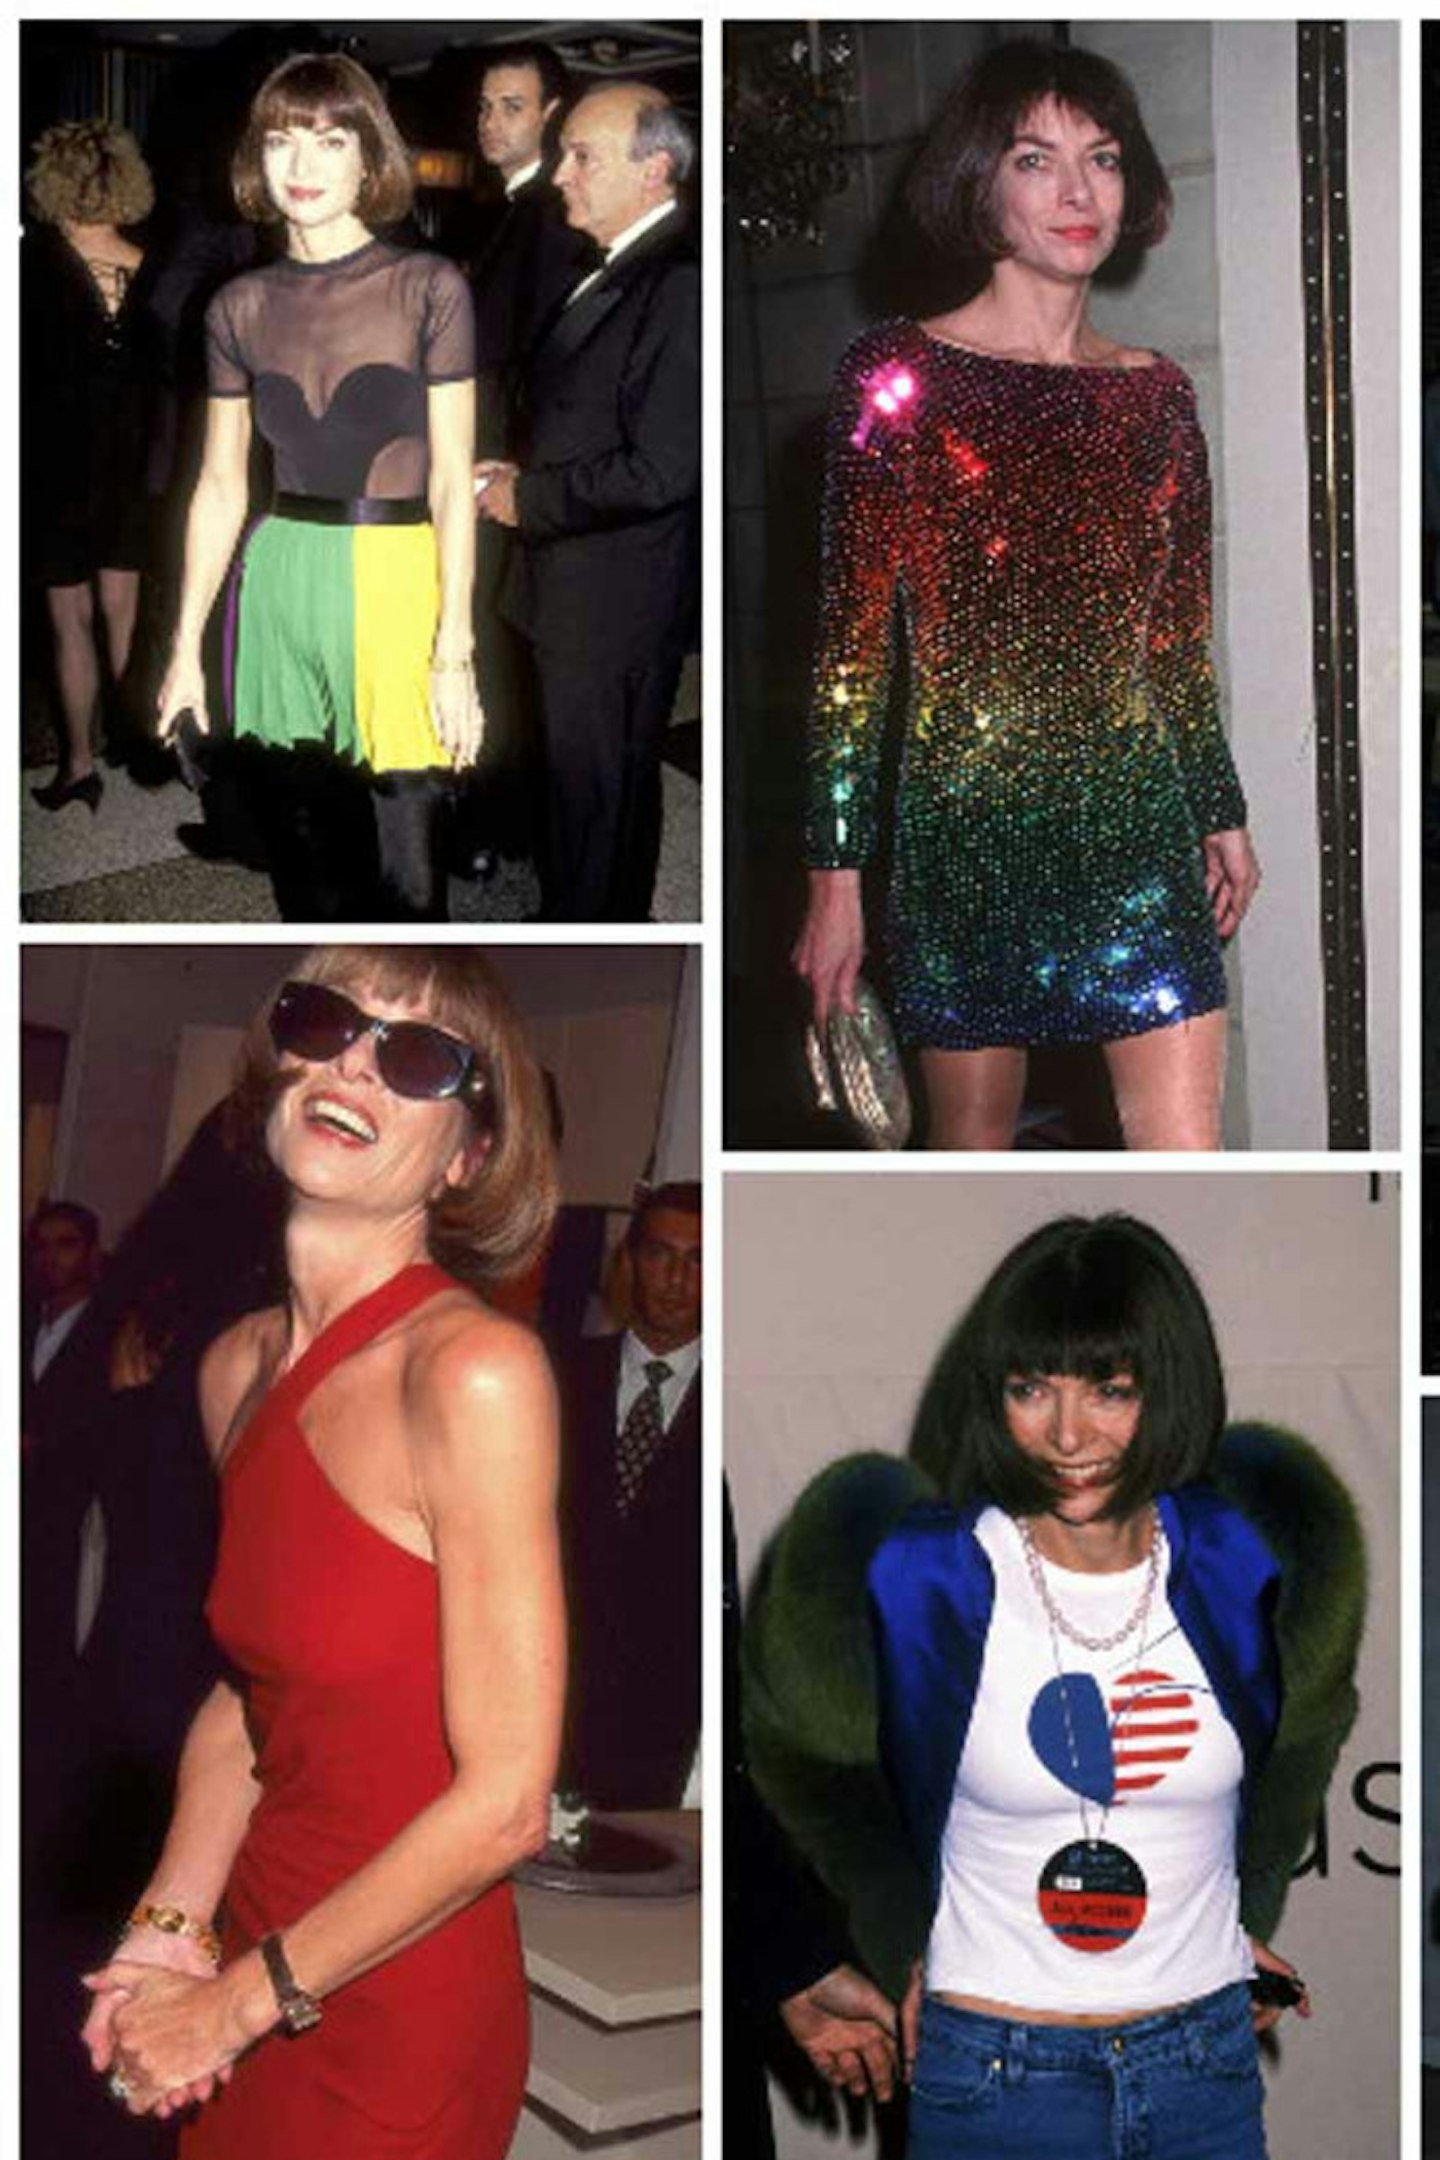 GALLERY>> Anna Wintour's Flashback Special